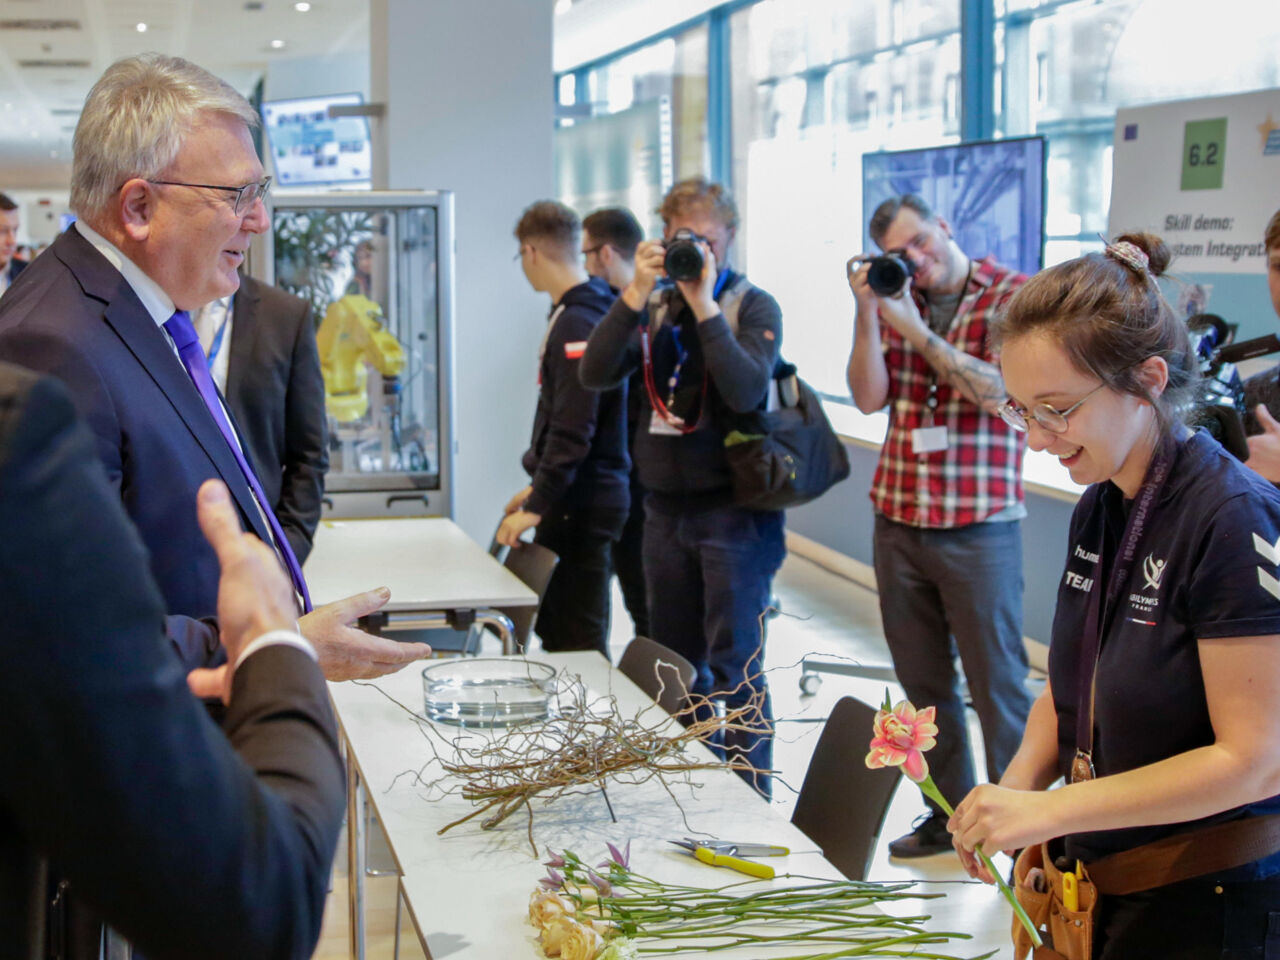 A WorldSkills Champion shows her floristry skills during the event ‘Meet the Champions of Excellence’ on 23 February 2024.